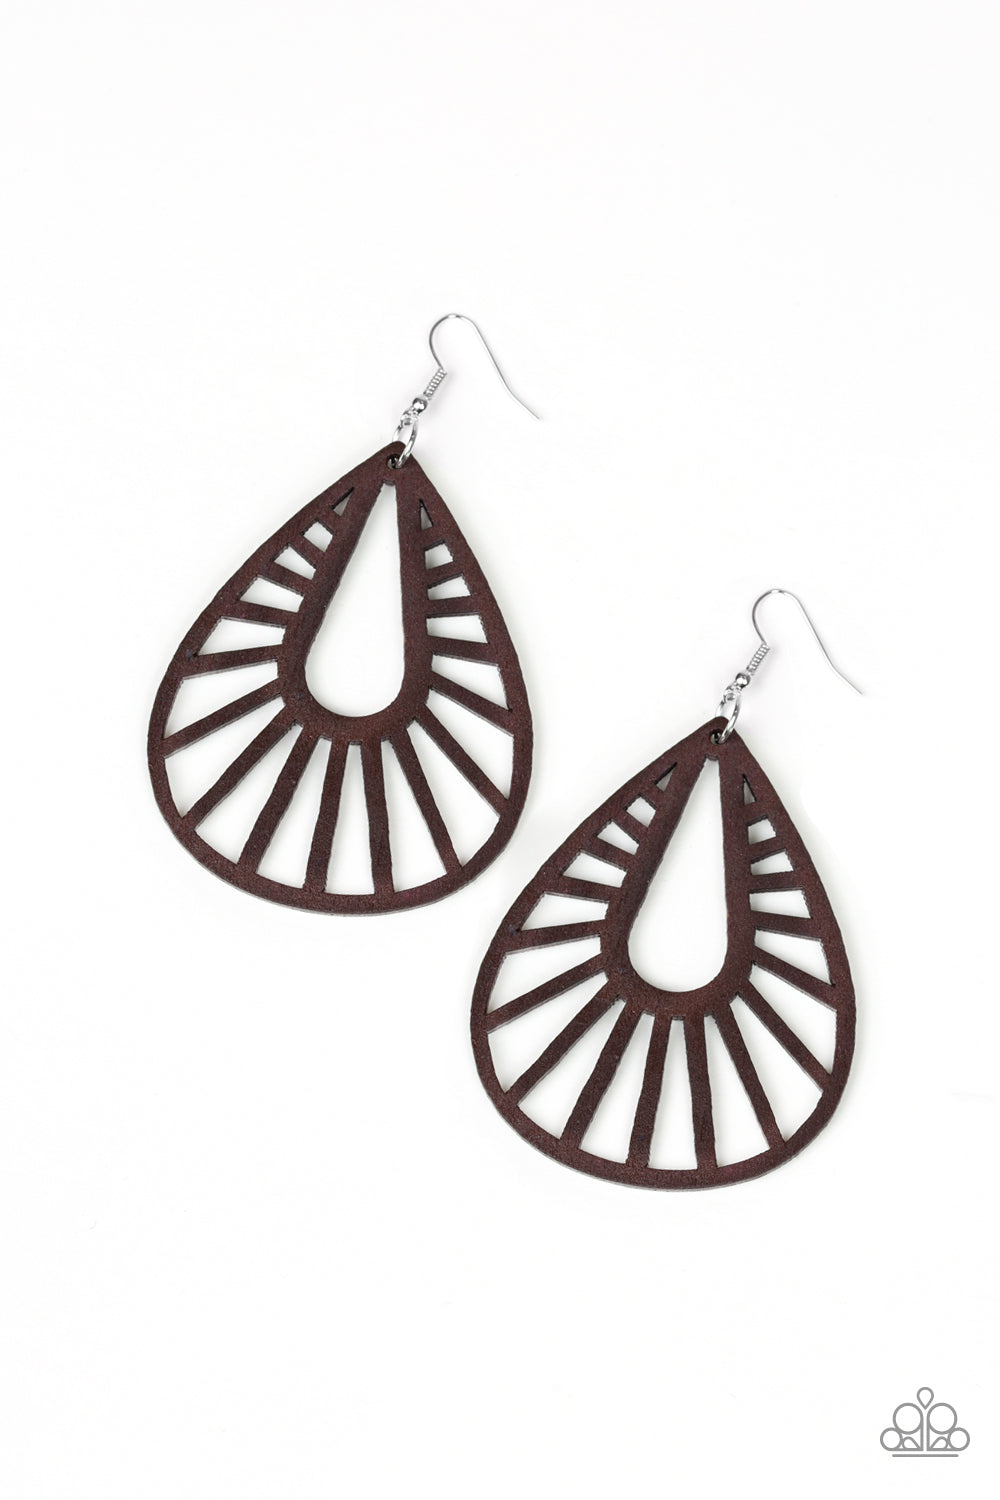 Paparazzi Accessories Coachella Chill - Brown Wood Earrings - Lady T Accessories